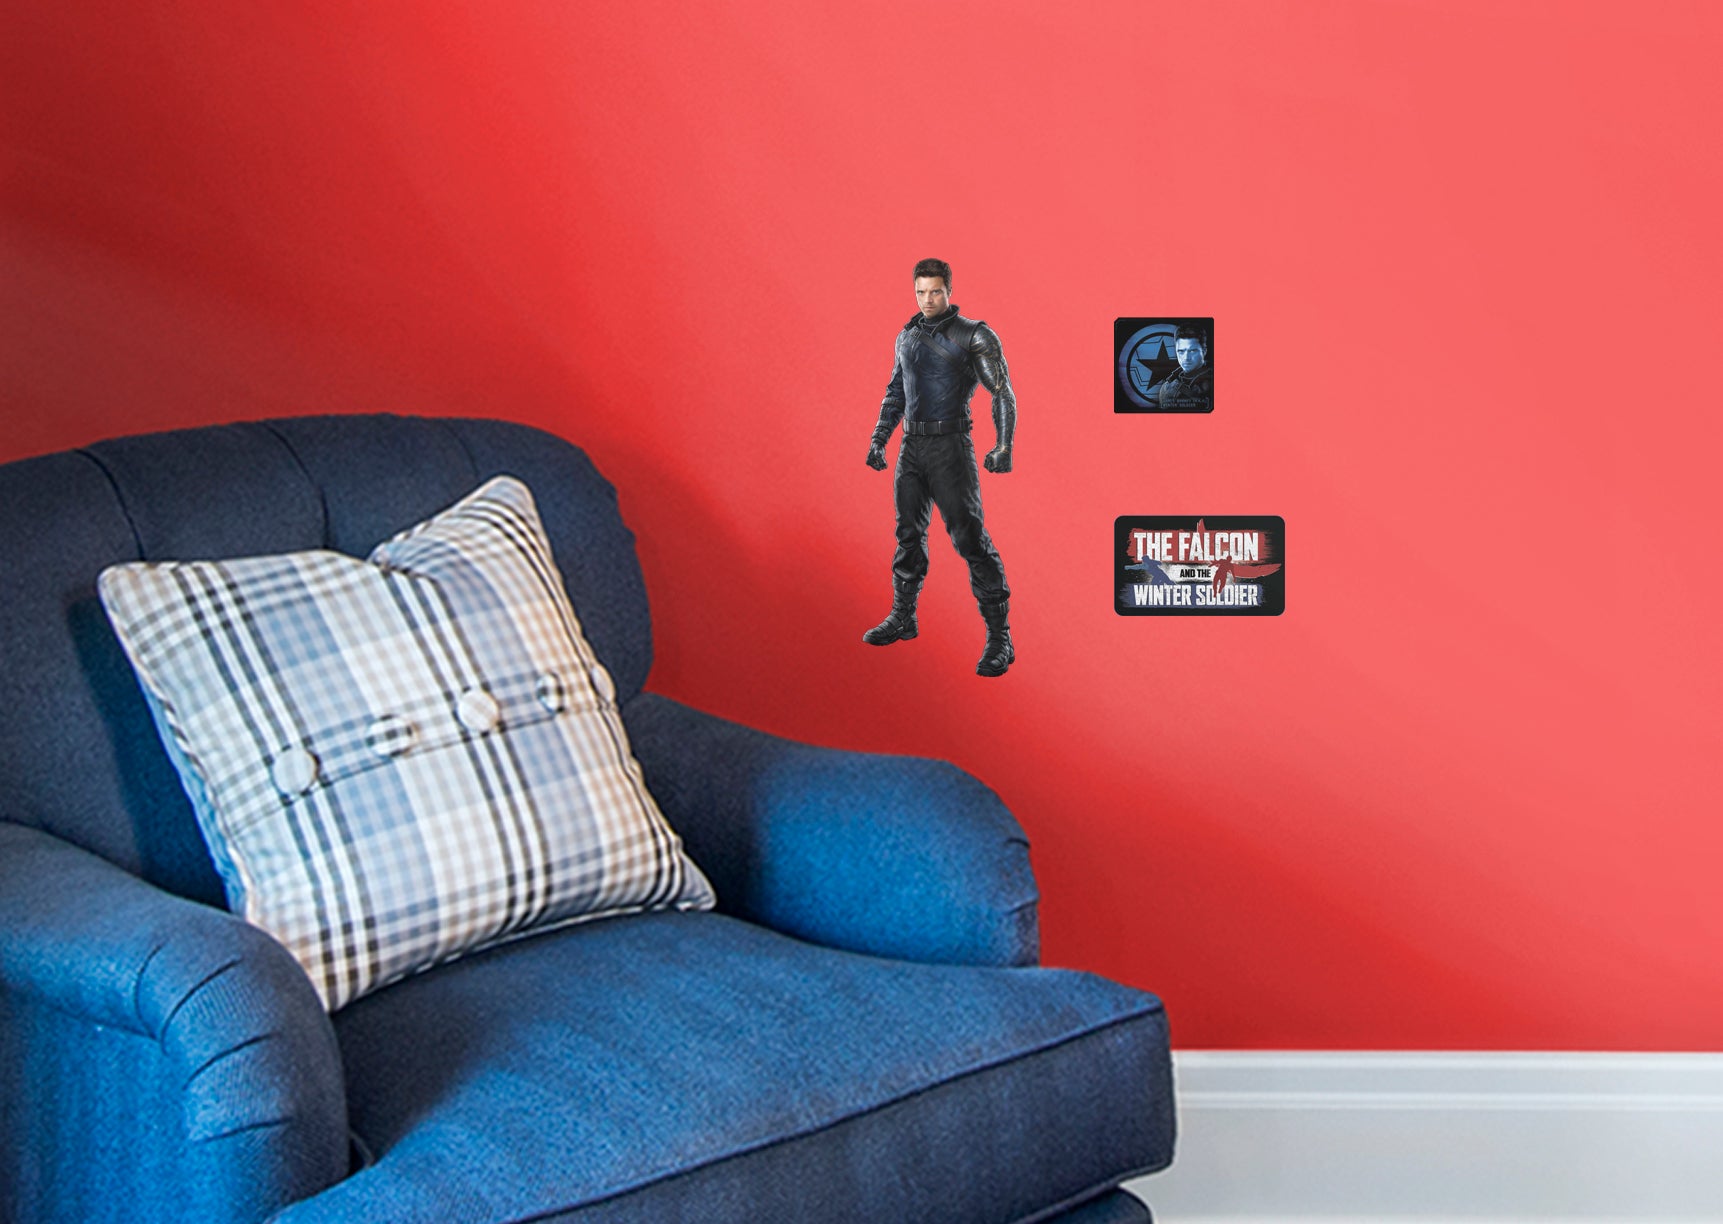 The Falcon & The Winter Soldier WINTER SOLDIER - Officially Licensed Marvel Removable Wall Decal Large by Fathead | Vinyl